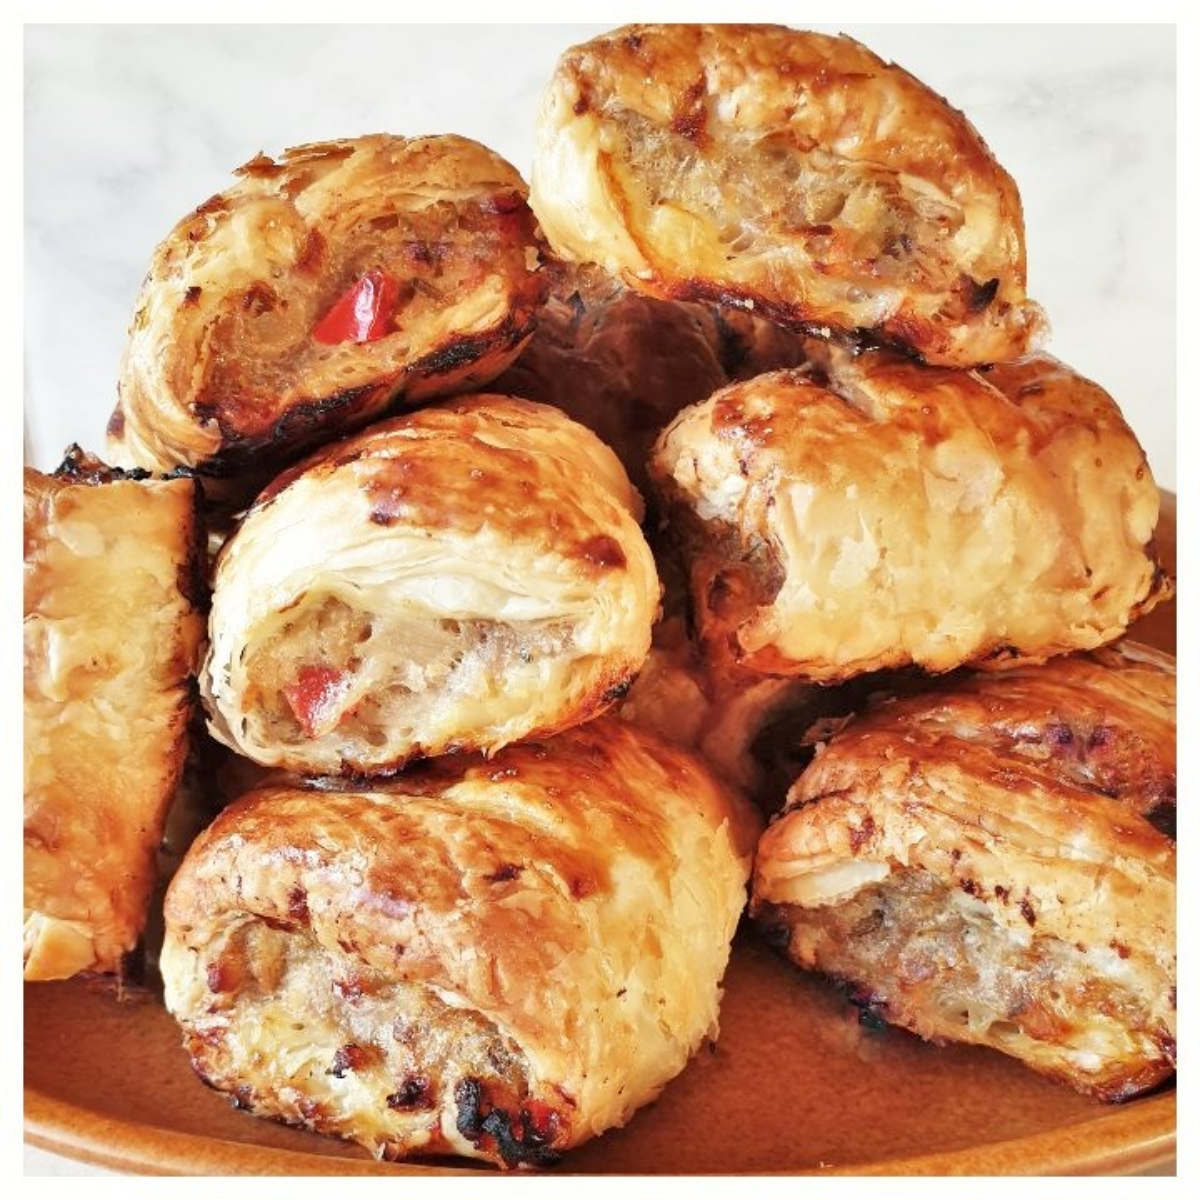 A pile of pork and apple sausage rolls on a plate.